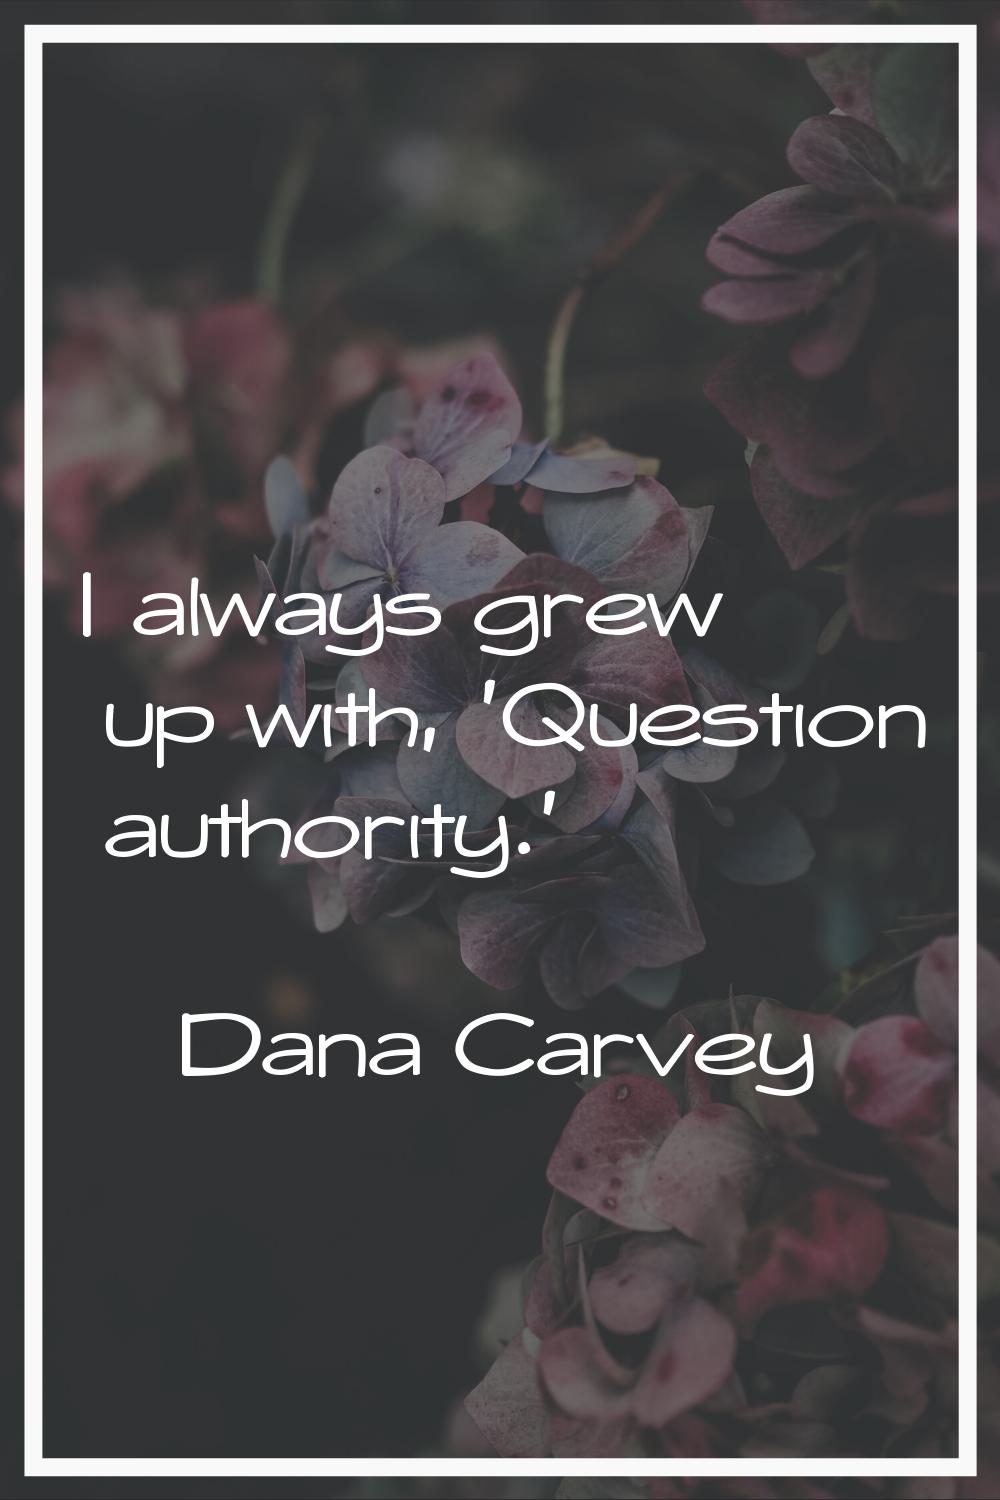 I always grew up with, 'Question authority.'